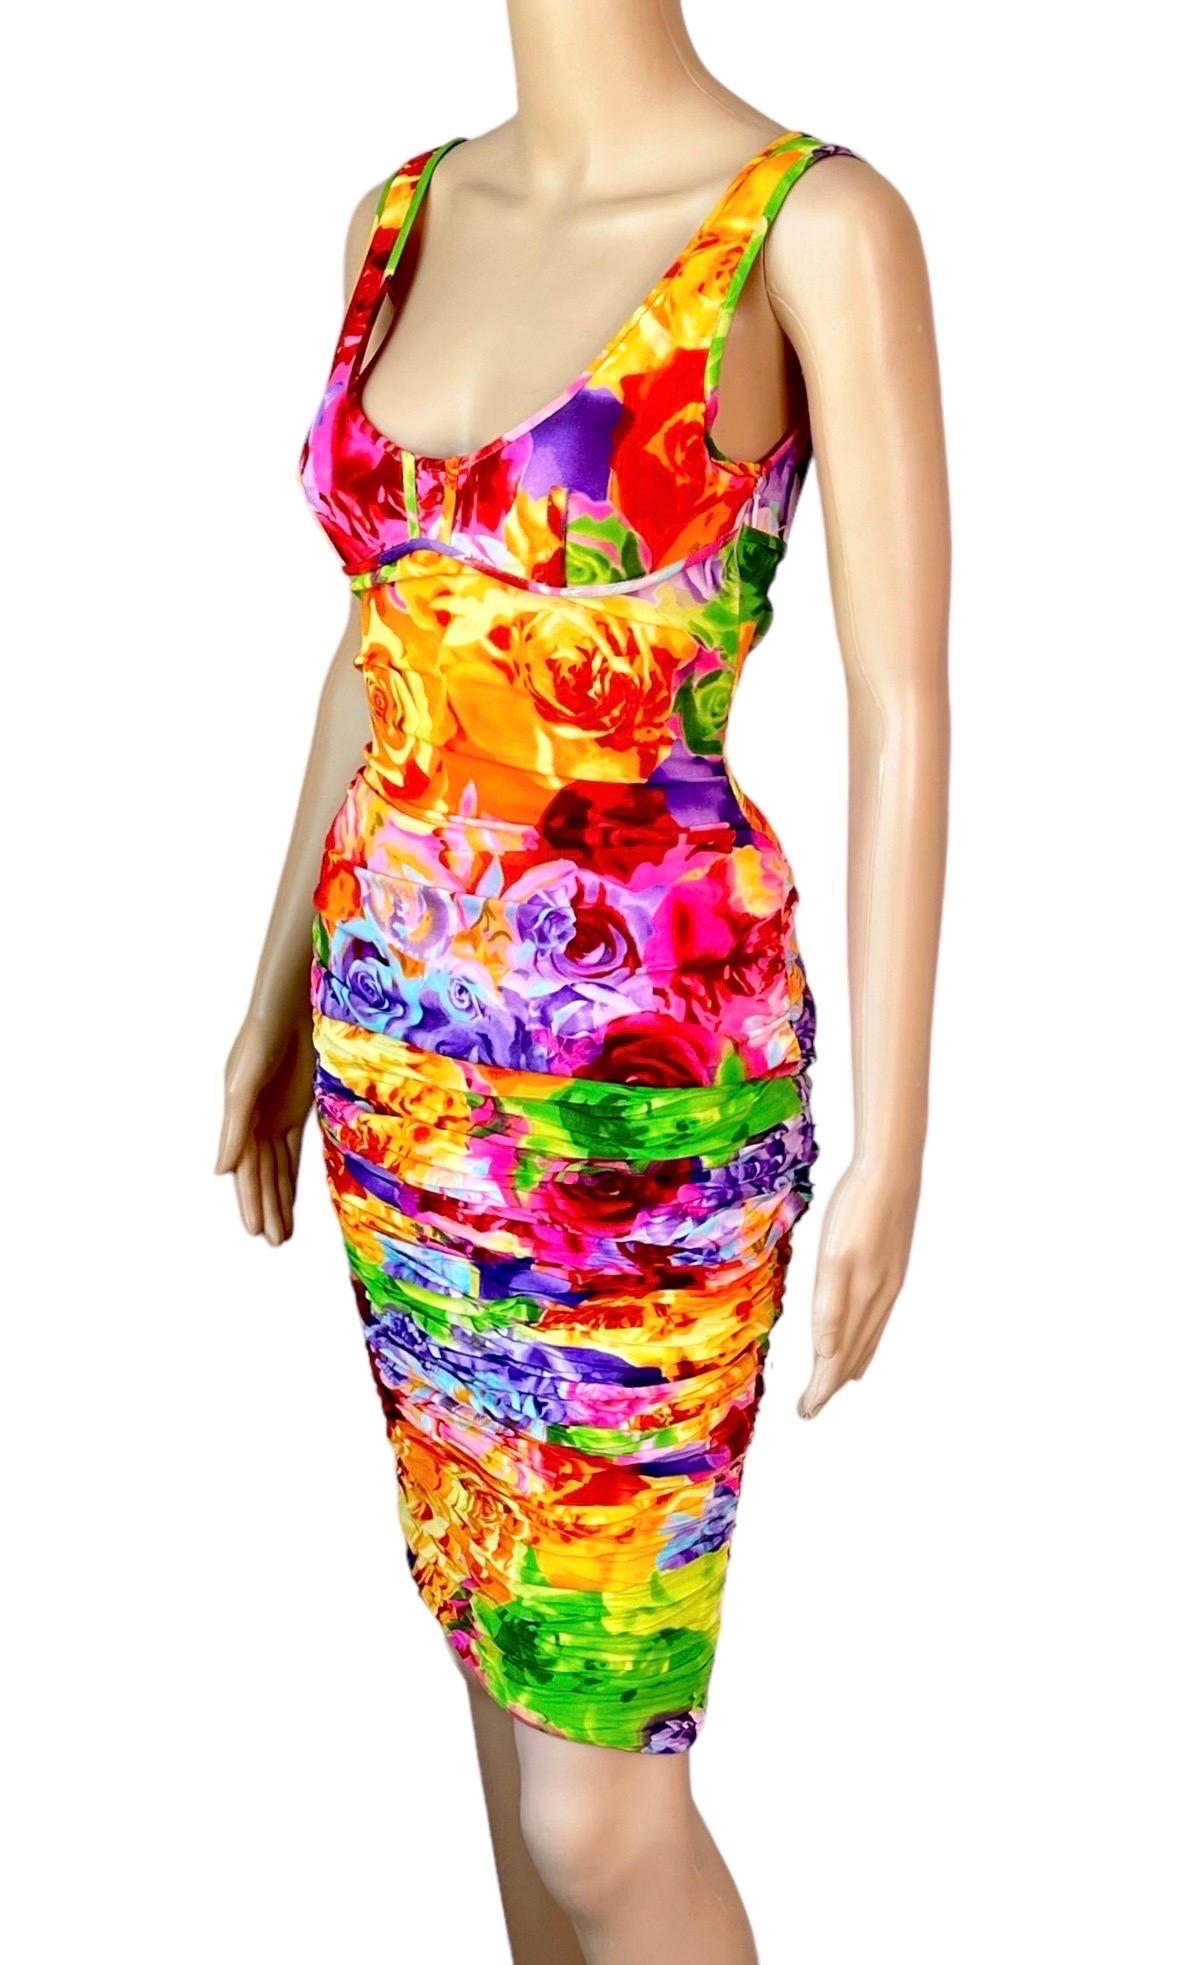 Women's Versace S/S 2005 Lace Up Floral Print Bustier Top & Ruched Skirt 2 Piece Set